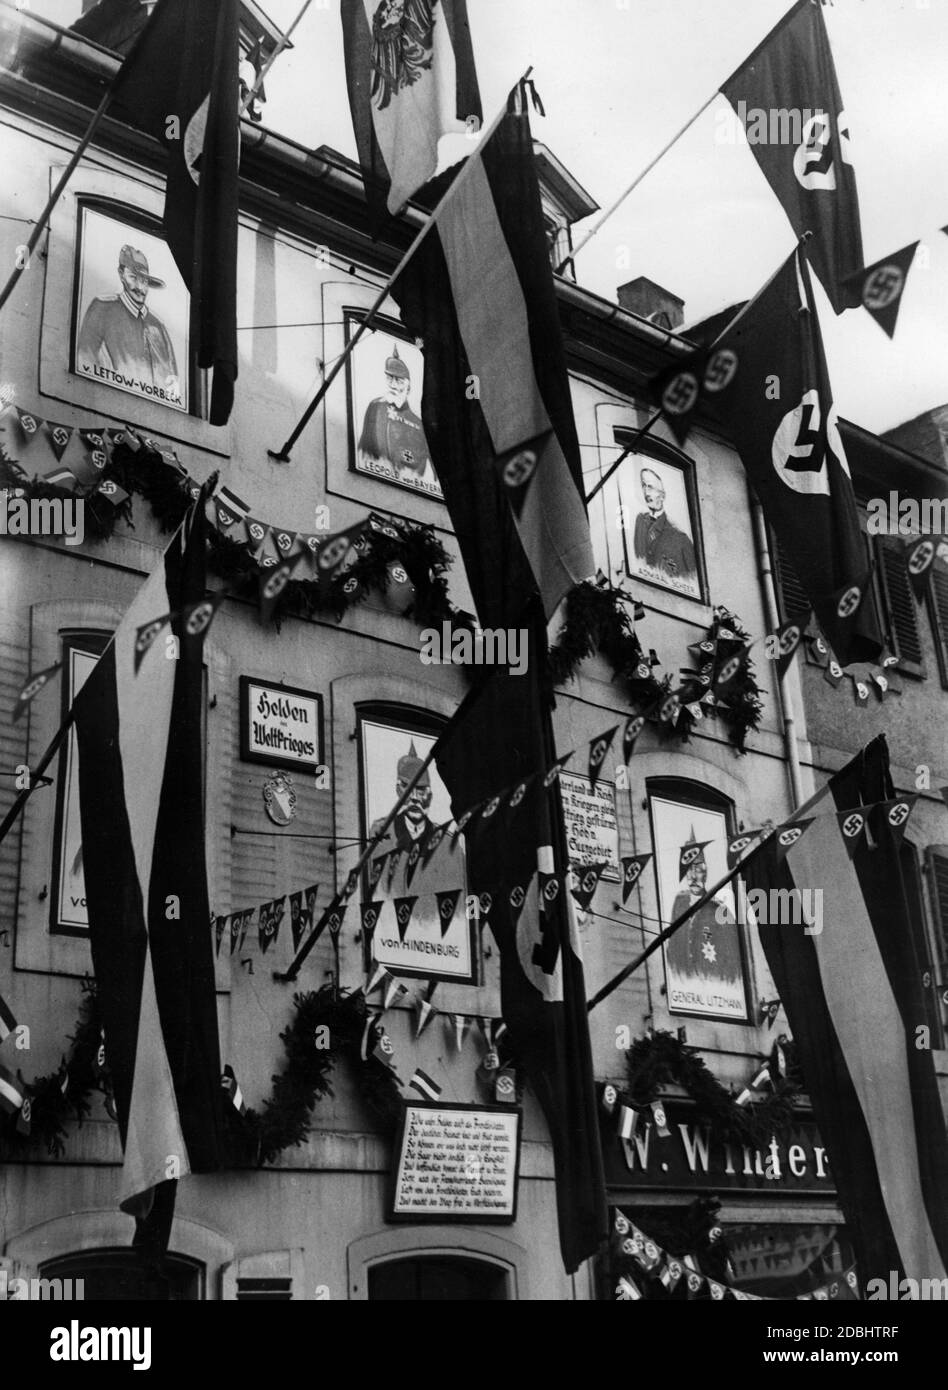 'In the days following the referendum on the return of the Saar region to the German Reich, the streets of Saarbruecken's old town are decorated with flags, banners and fir sprigs. In addition, in the windows of these houses are displayed portraits of the ''Heroes of the World War''. Paul von Lettow-Vorbeck, Prince Leopold of Bavaria, Admiral Reinhard Scheer, Paul von Hindenburg, General Karl Litzmann.' Stock Photo